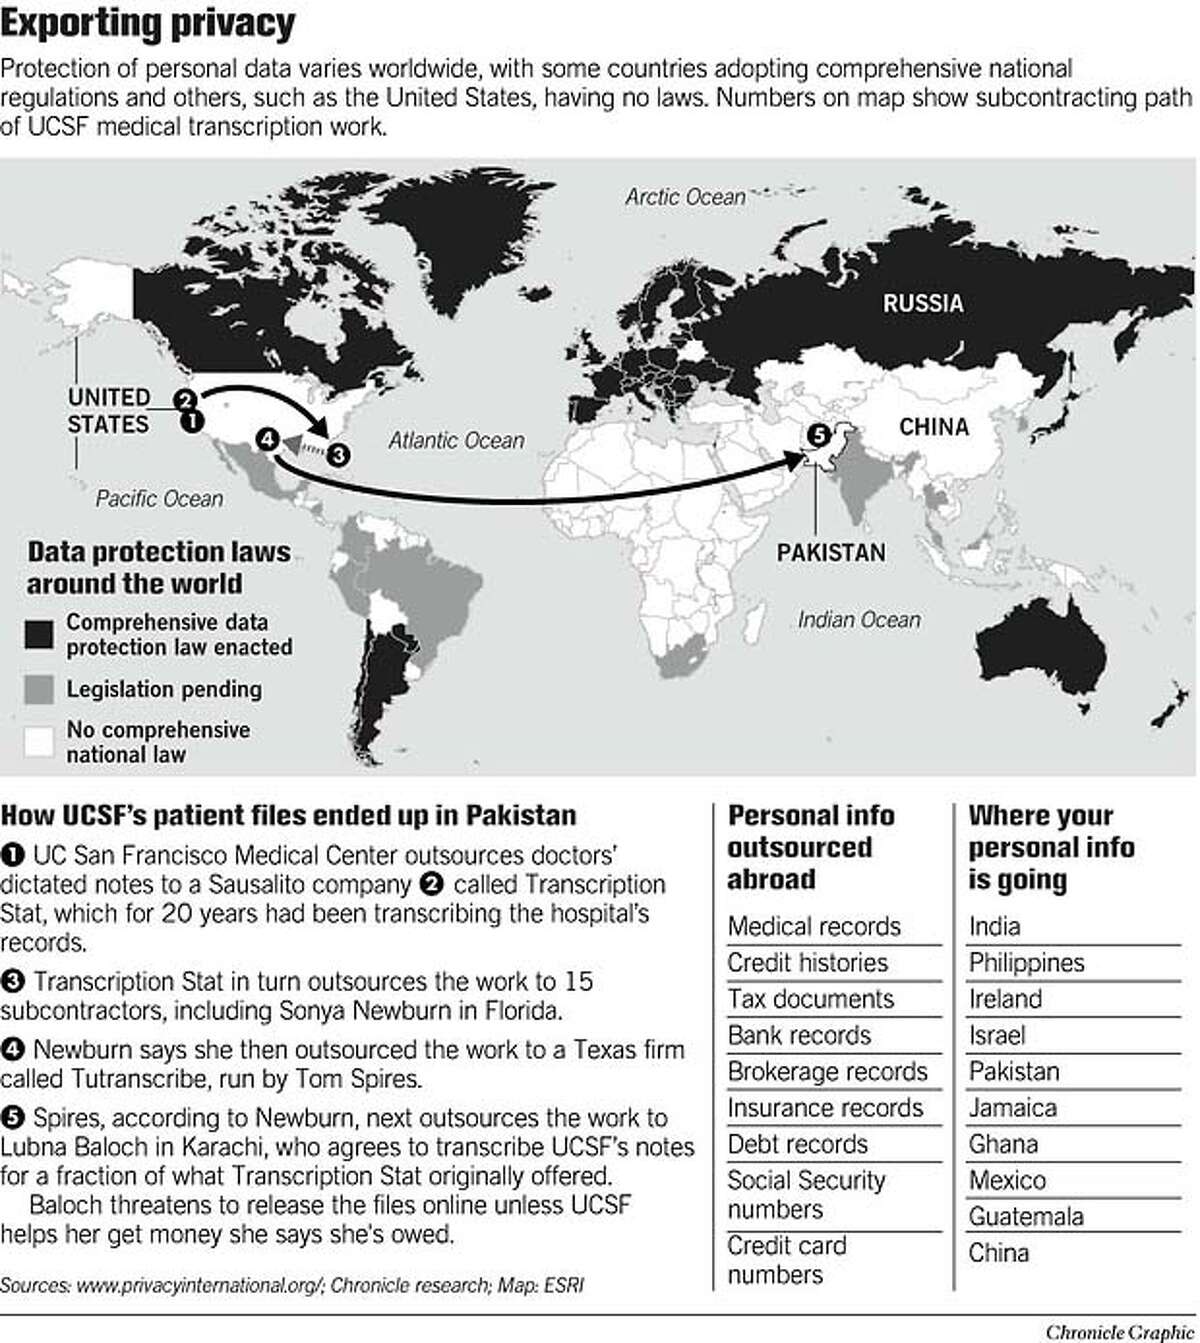 Exporting Privacy. Chronicle Graphic